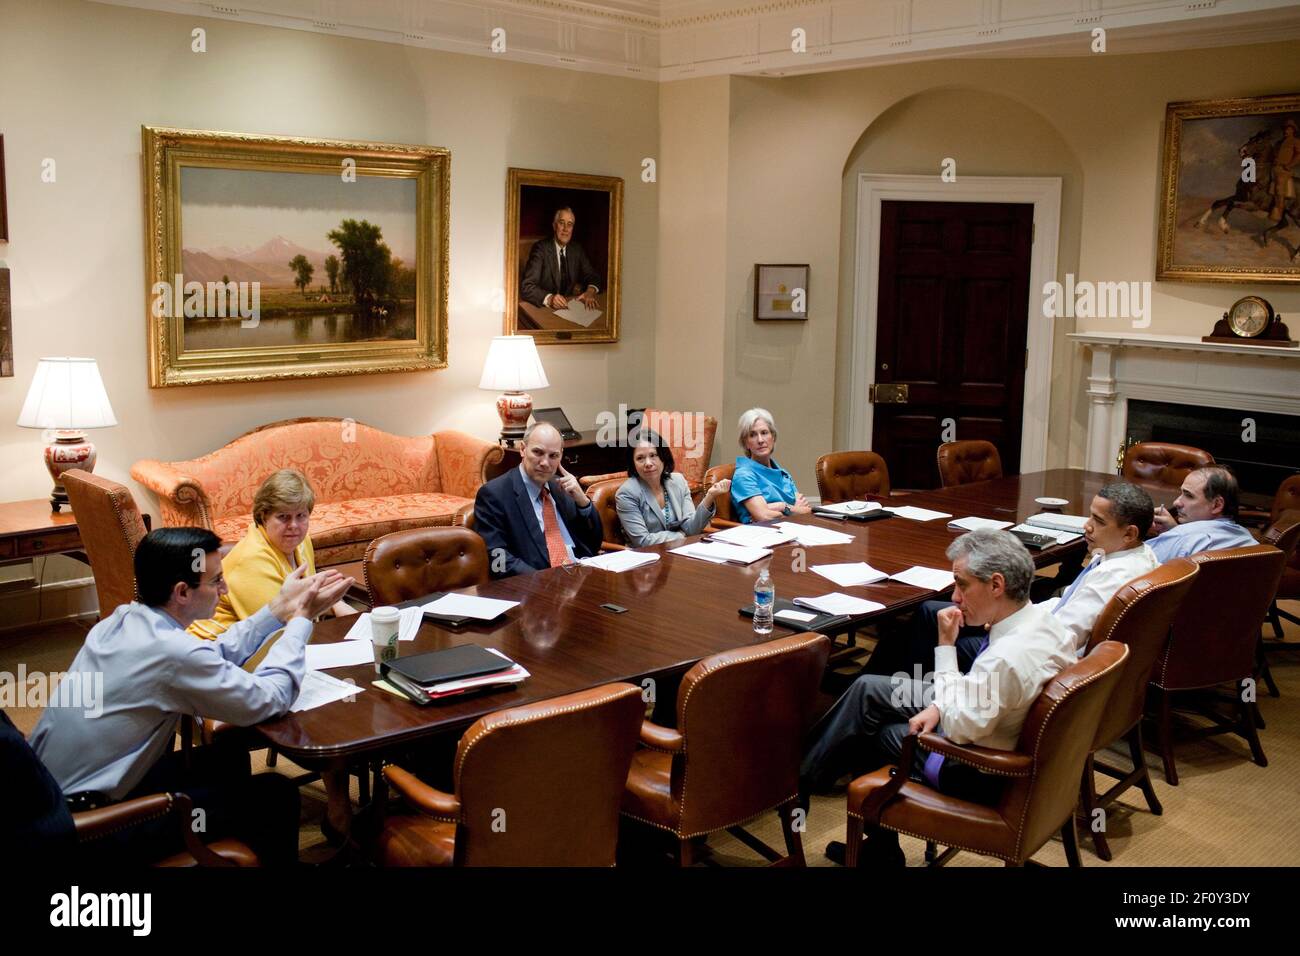 President Barack Obama attends a health care meeting in the Roosevelt Room of the White House,  August 7, 2009.  From left; Peter Orszag,  Christy Romer, Phil Schiliro, Nancy-Ann Deparle, Kathleen Sebelius, Chief of Staff Rahm Emanuel, President Obama, and David Axelrod Stock Photo